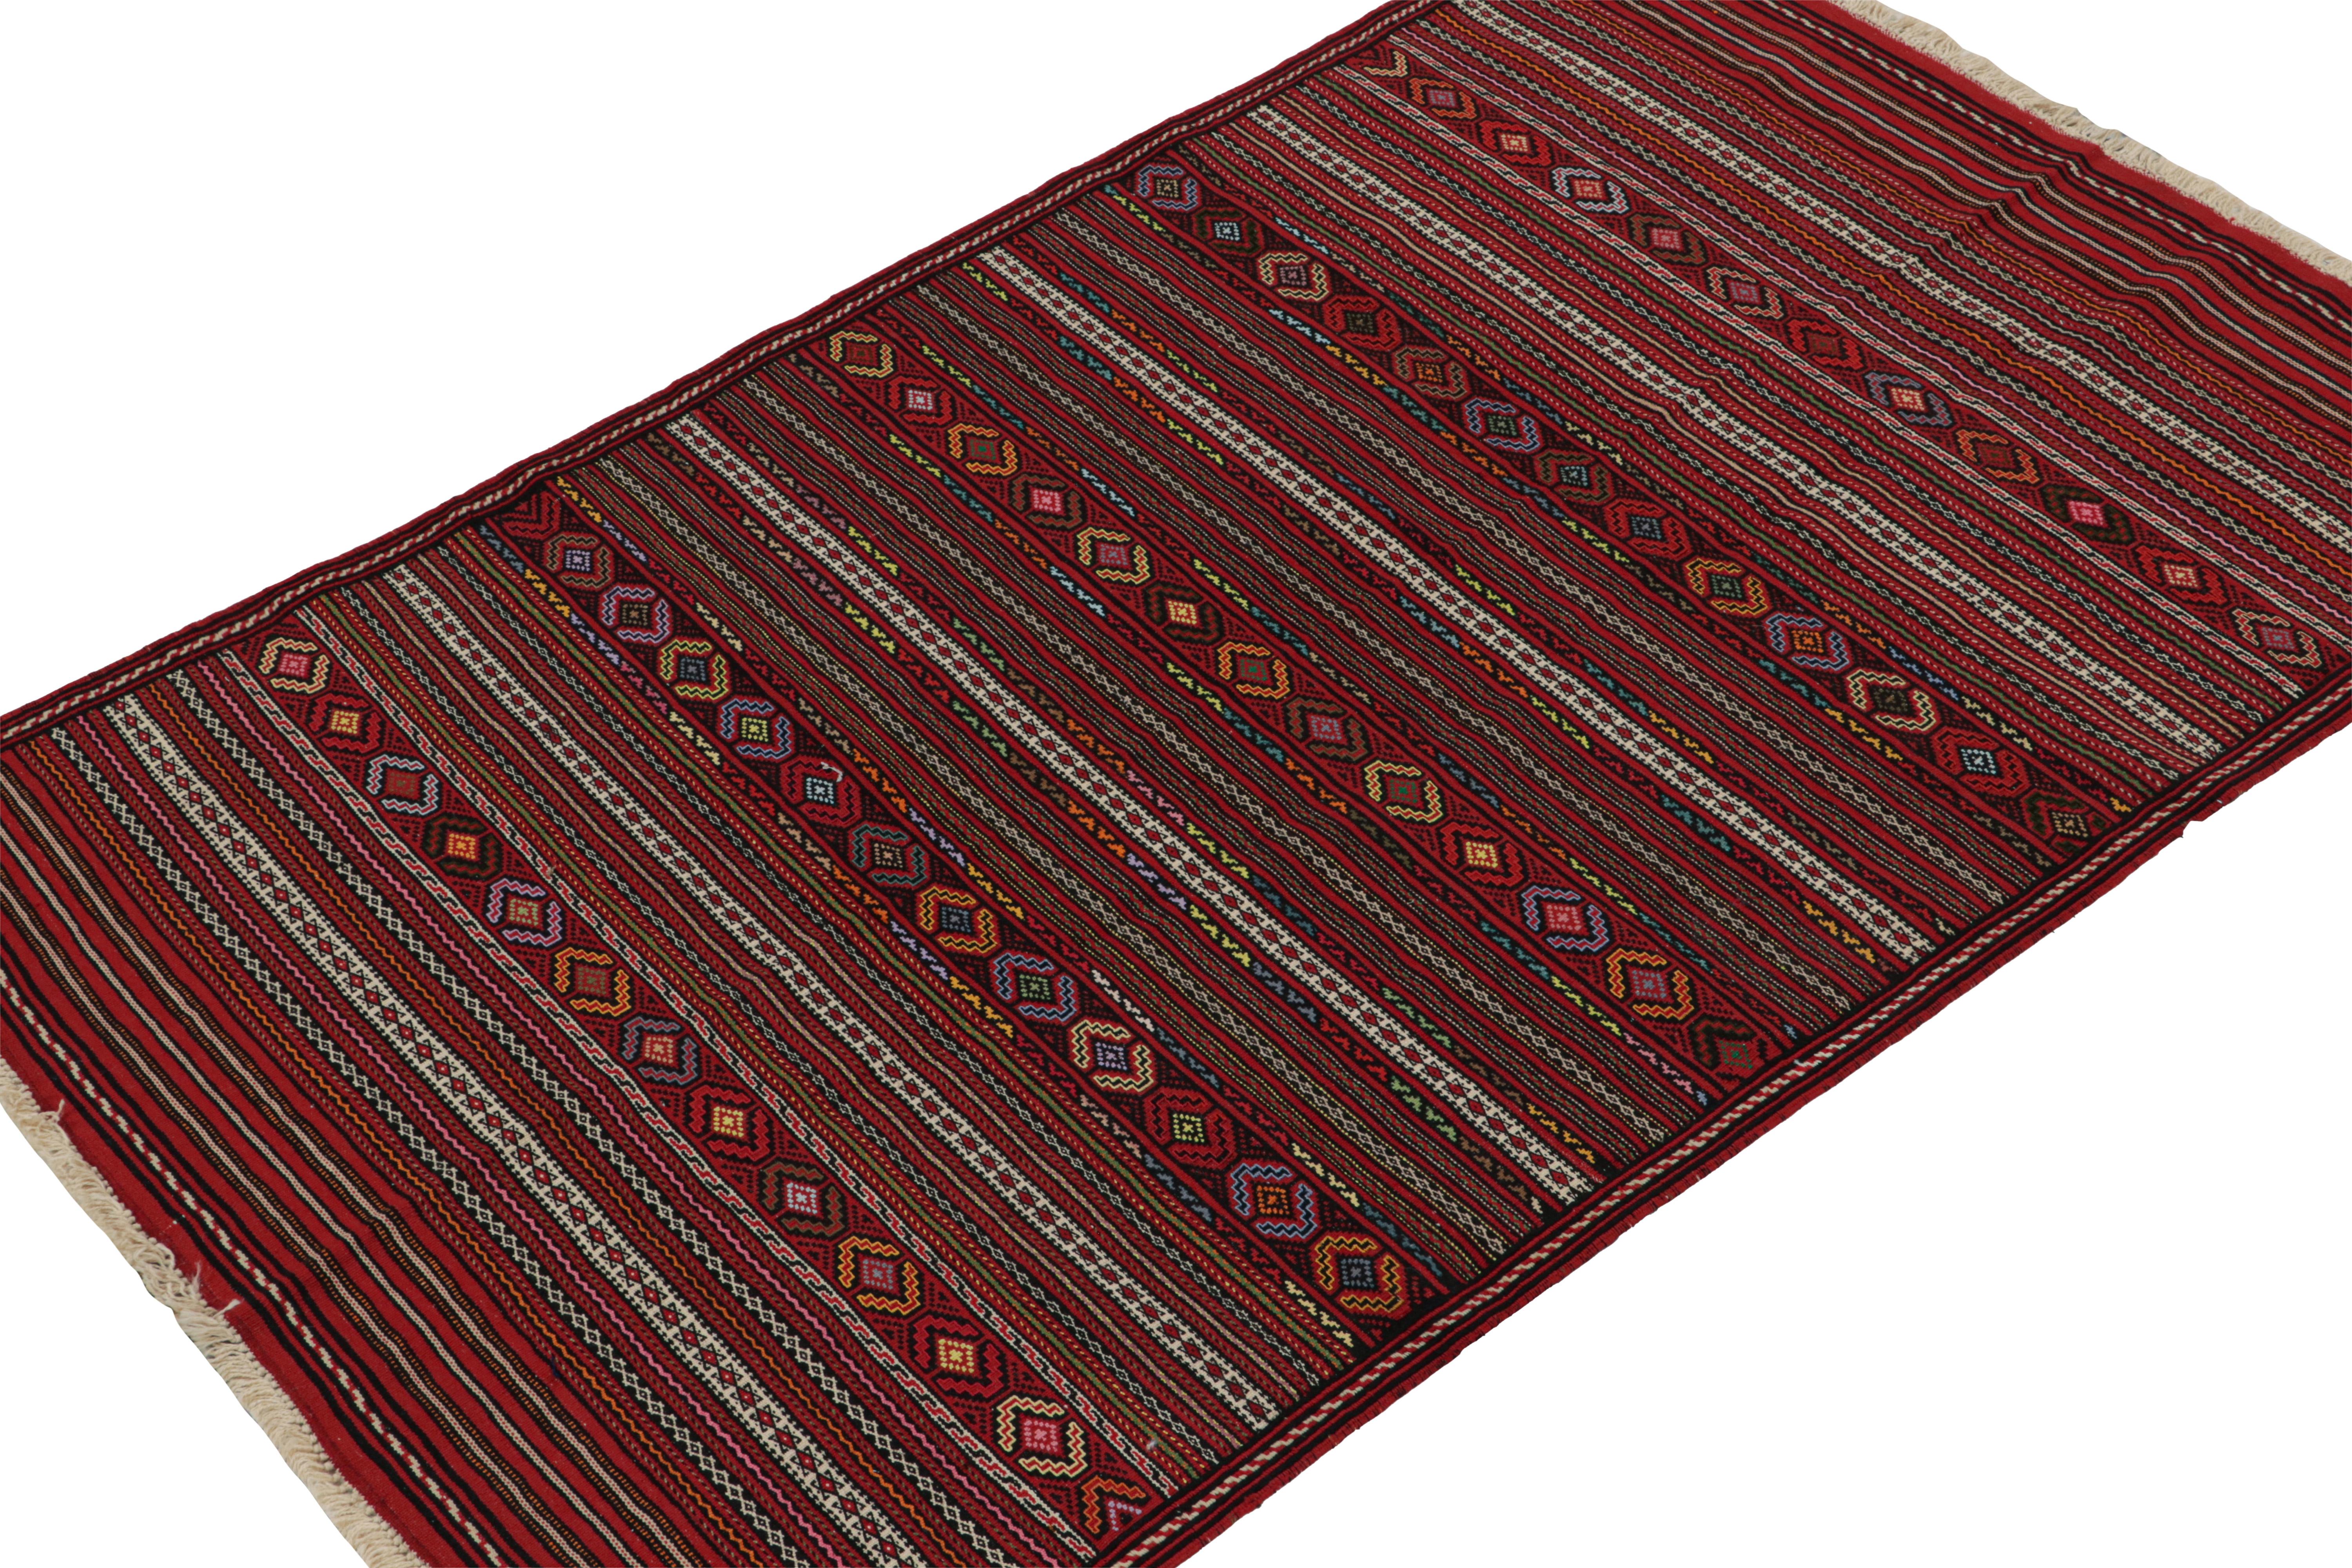 Handwoven in wool circa 1950-1960, this 4x7 vintage Baluch Kilim  is a new curation from Rug & Kilim’s primitivist flatweaves. 

On the Design:

Specifically believed to hail from the Leghari clan of this nomadic people, this tribal rug enjoys